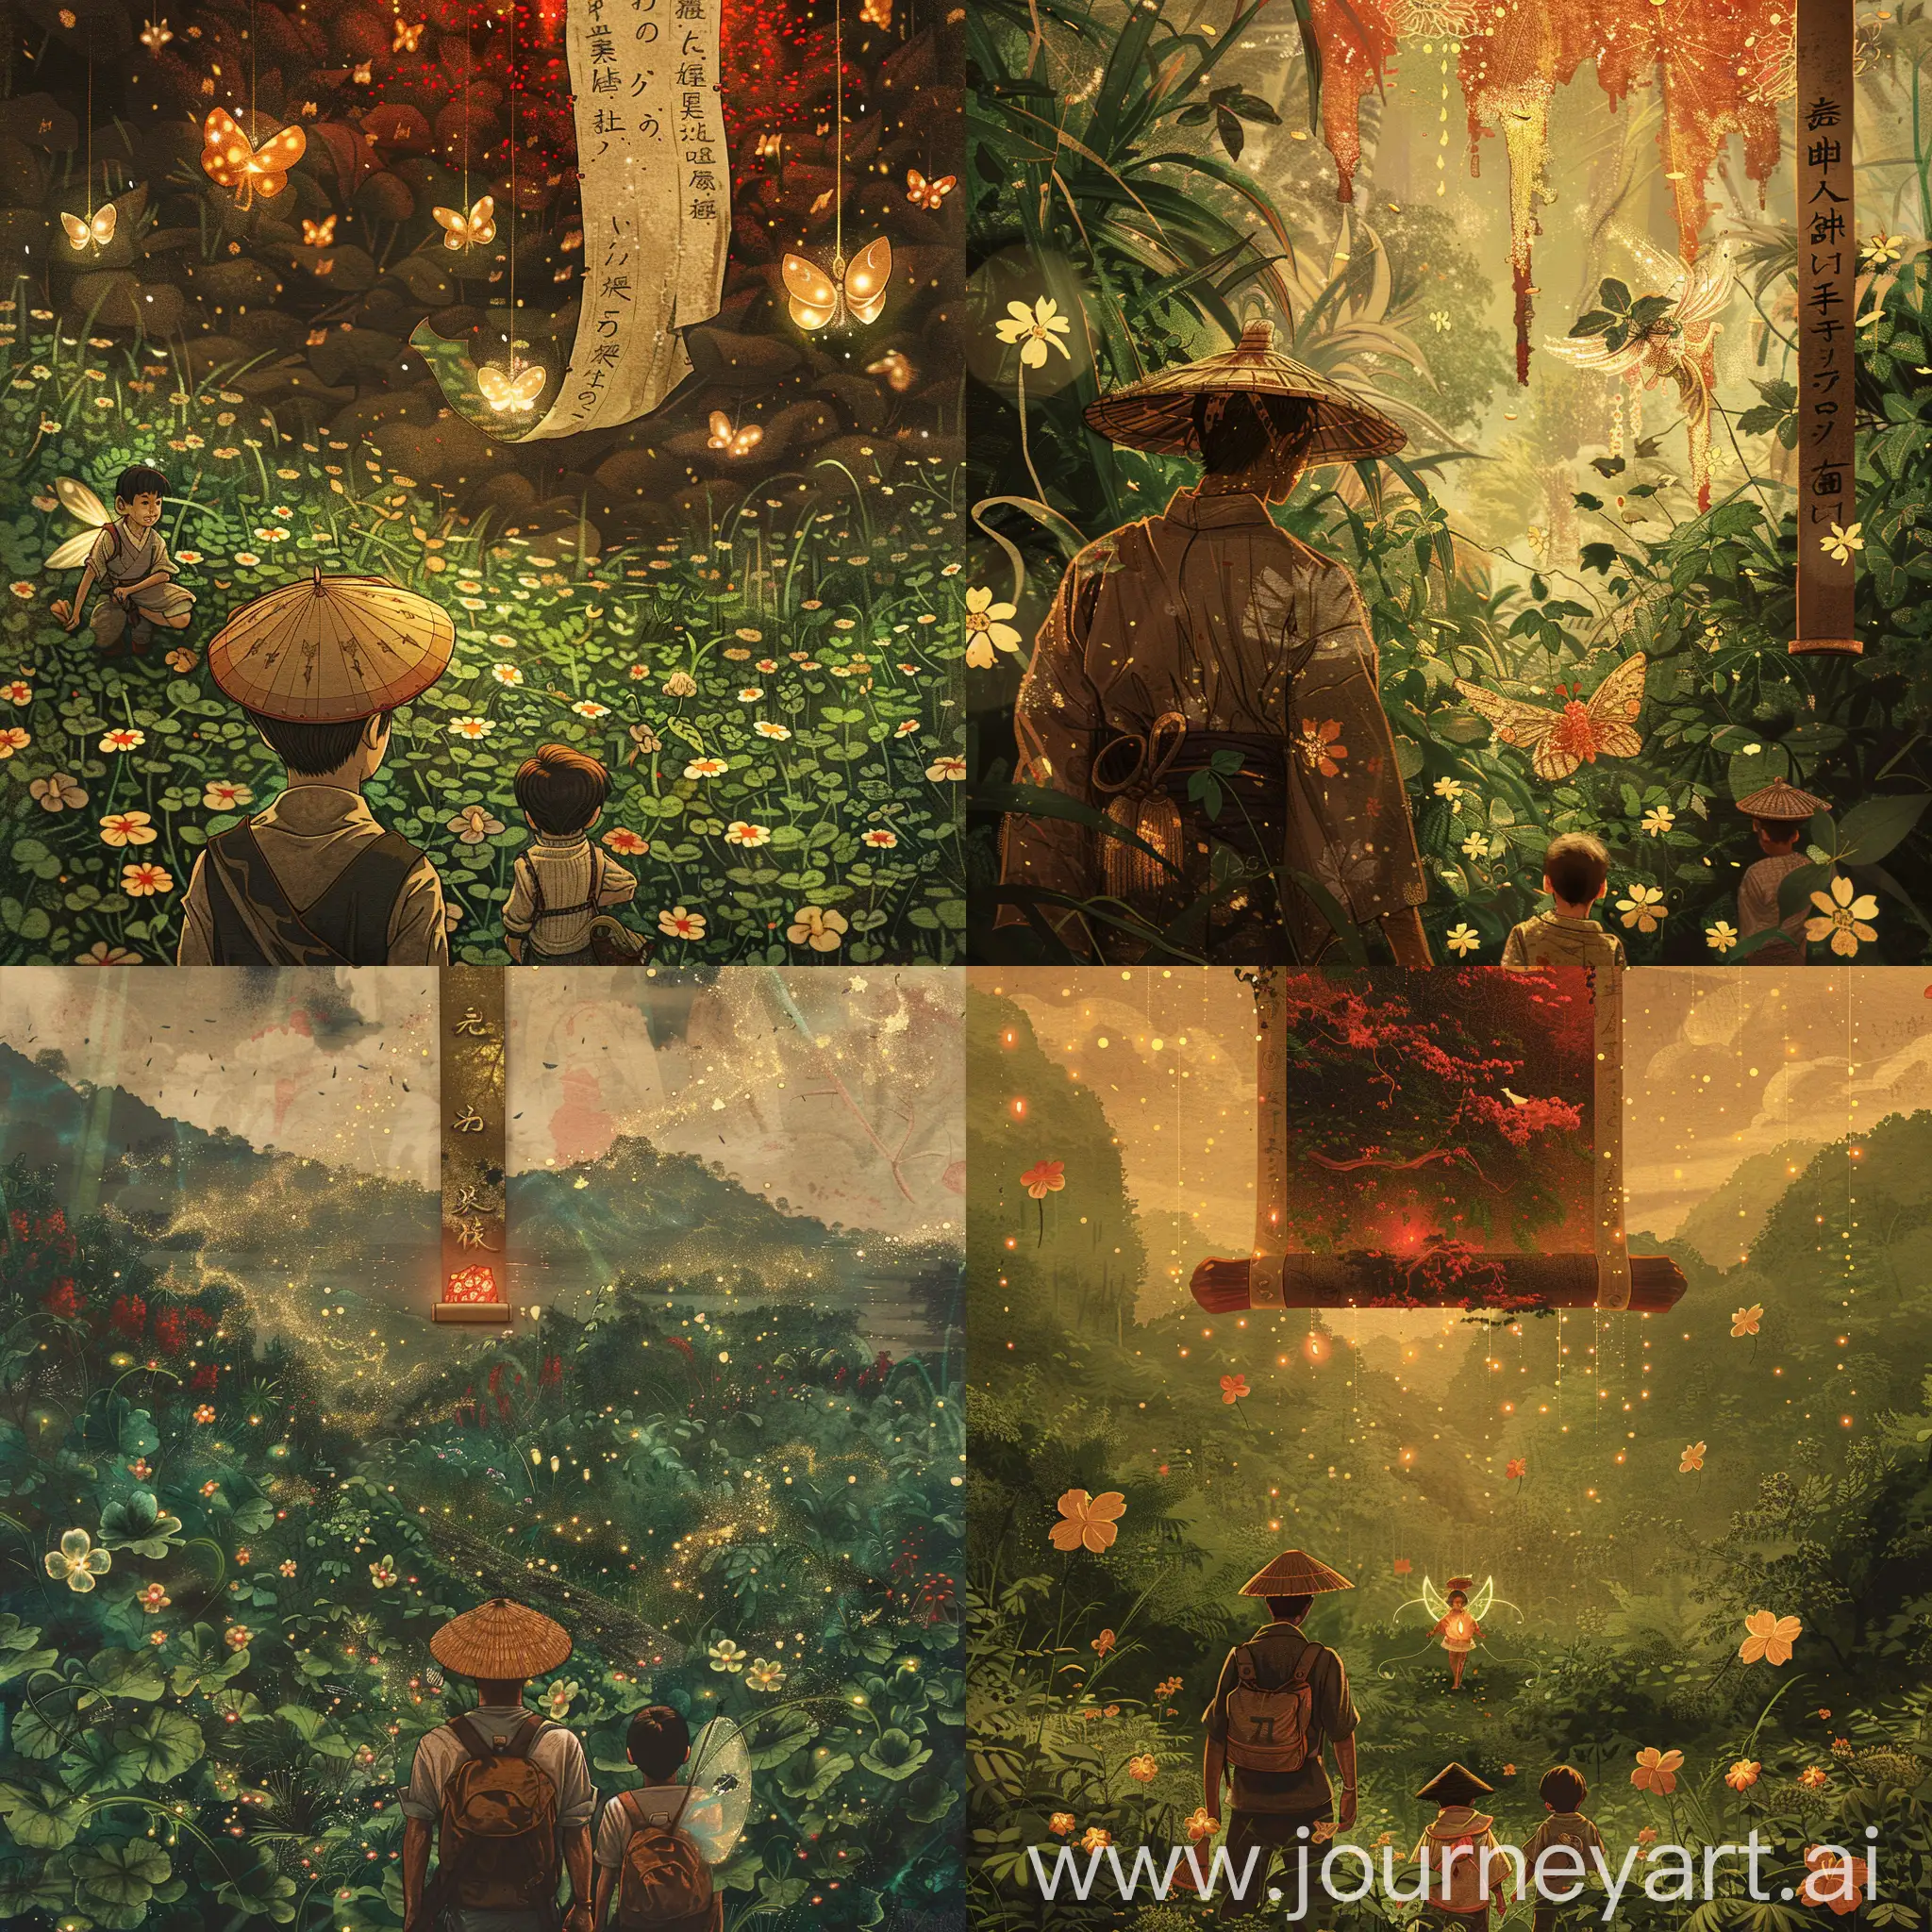 an illustration exploration japan a man on trekking hat with a 2boys and an with fairy ((clover flowers lights))(zoom up), clover flowers fields jungle, in the style of dark gold molten filigree and red, confessional, playful and whimsical designs, notable sense of movement, i can't believe how beautiful this is, high-angle, hanging scroll